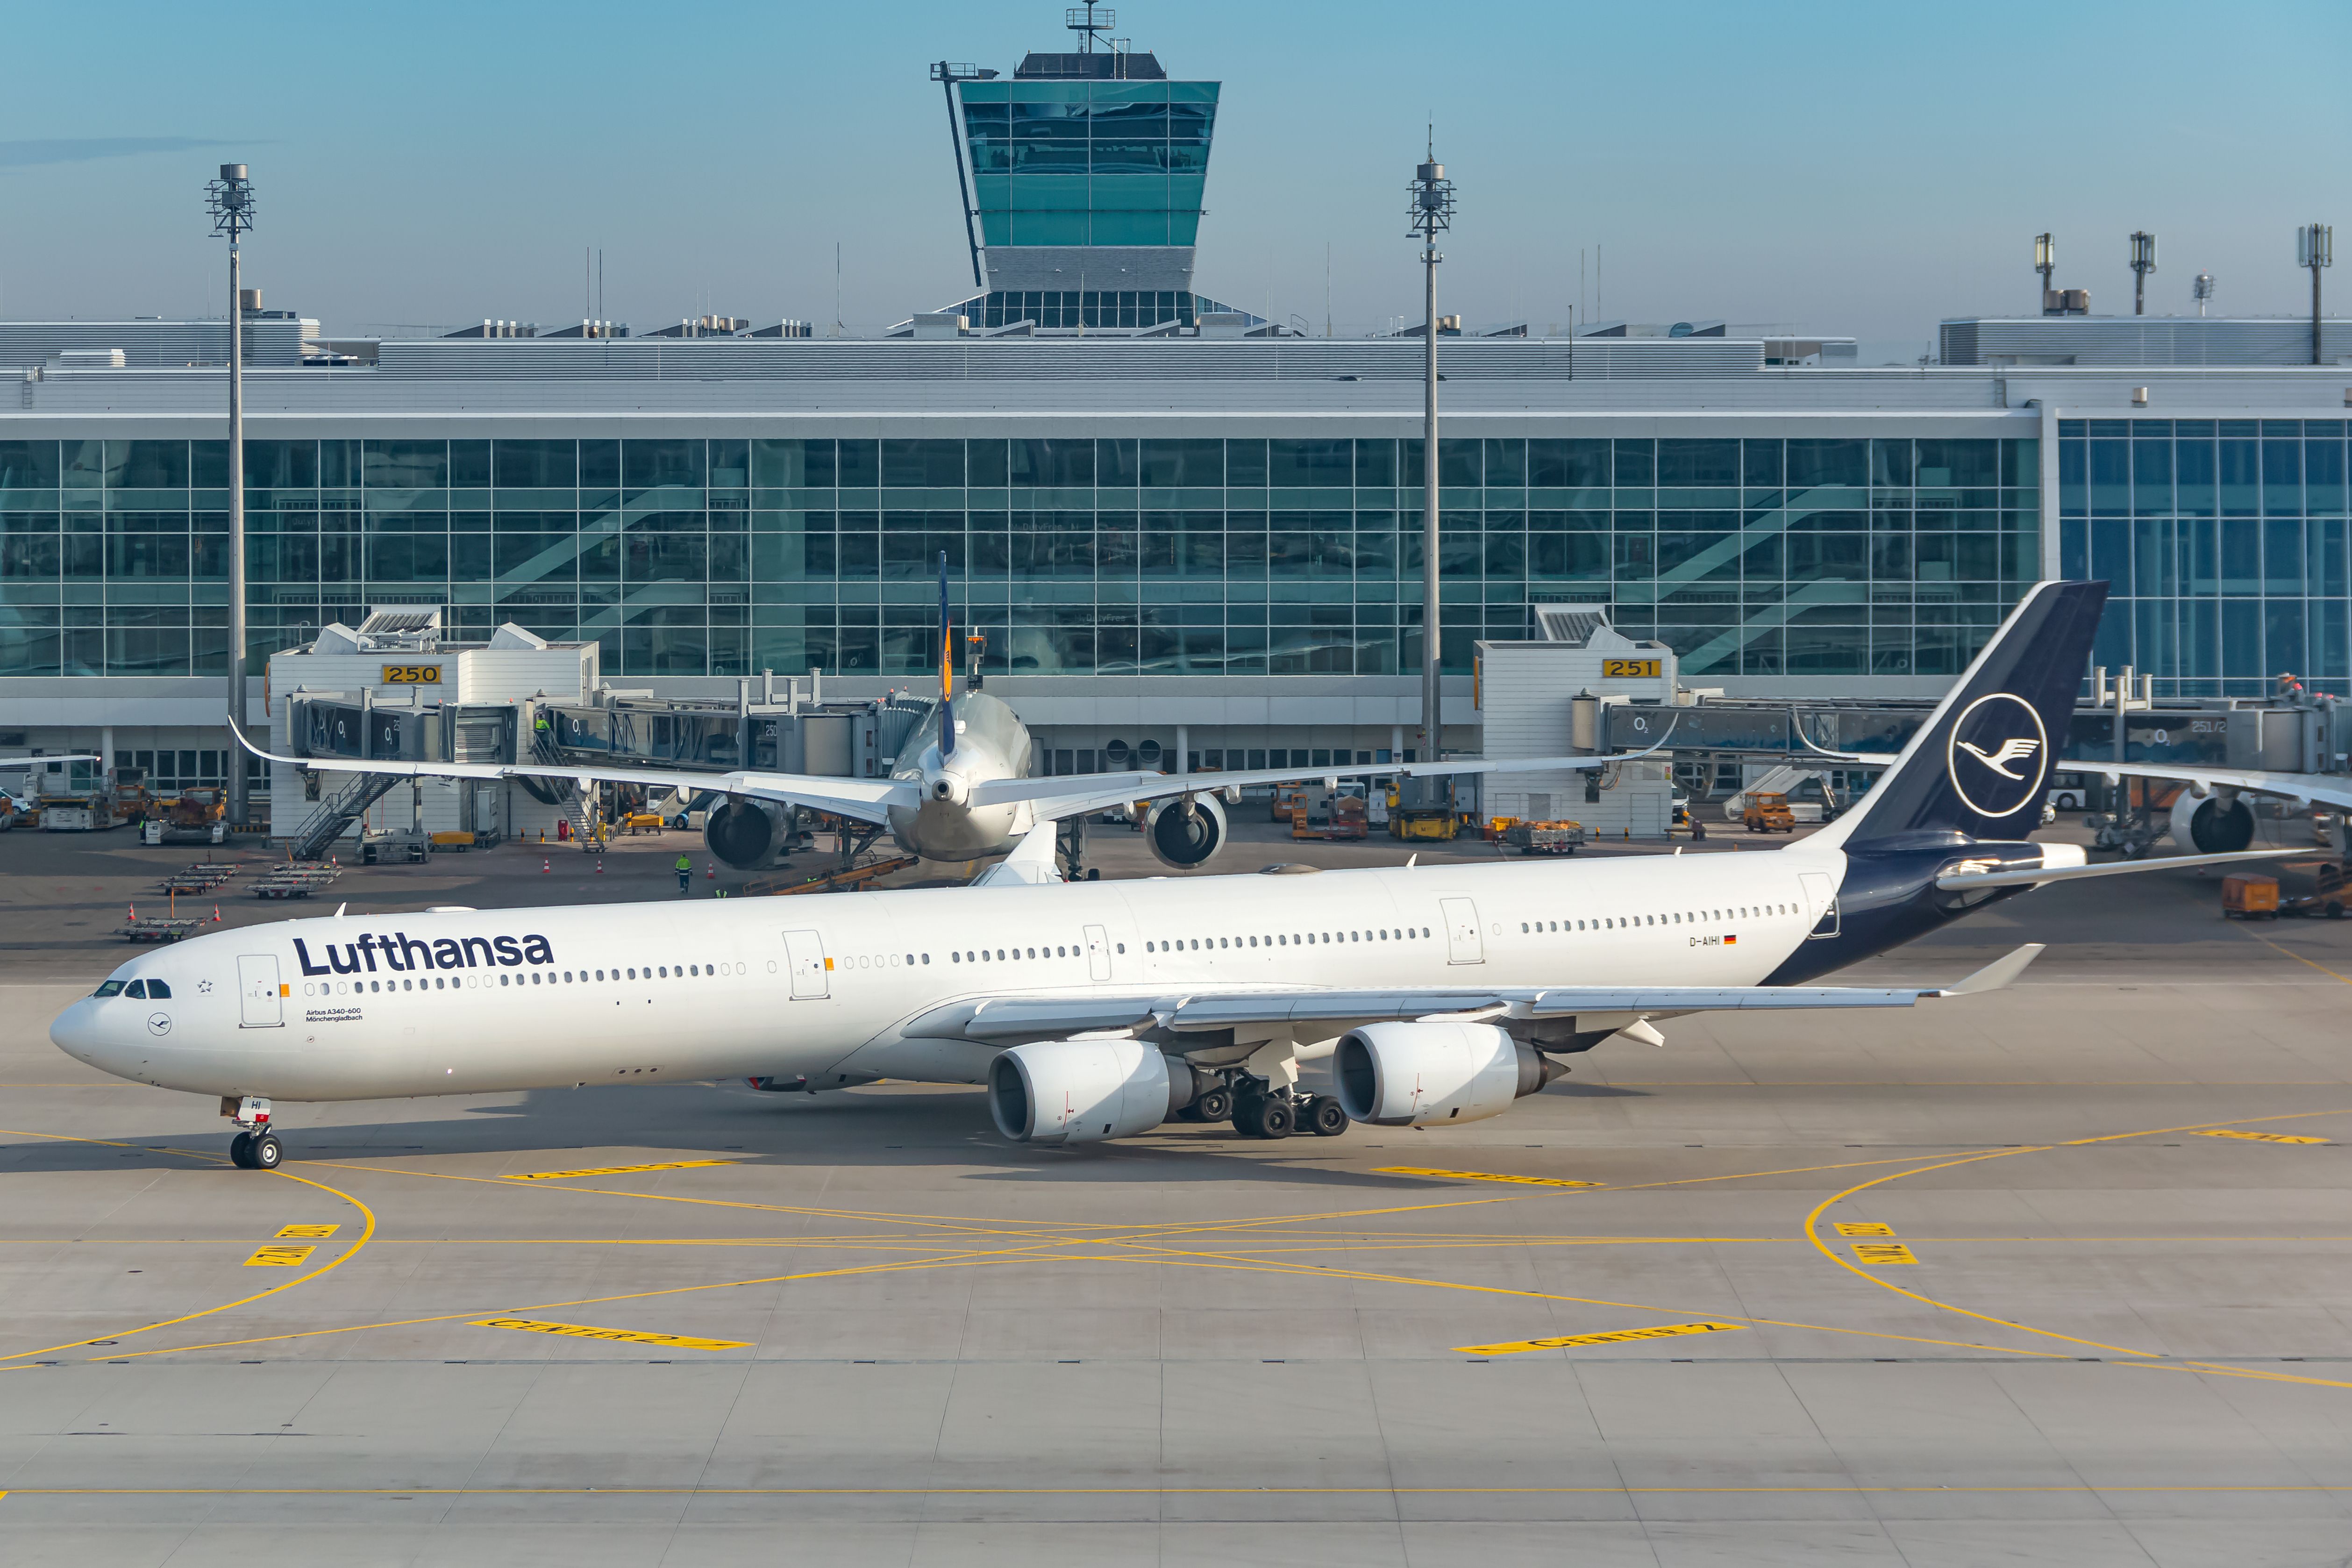 A Lufthansa Airbus A340-600 on the apron at Munich Airport.